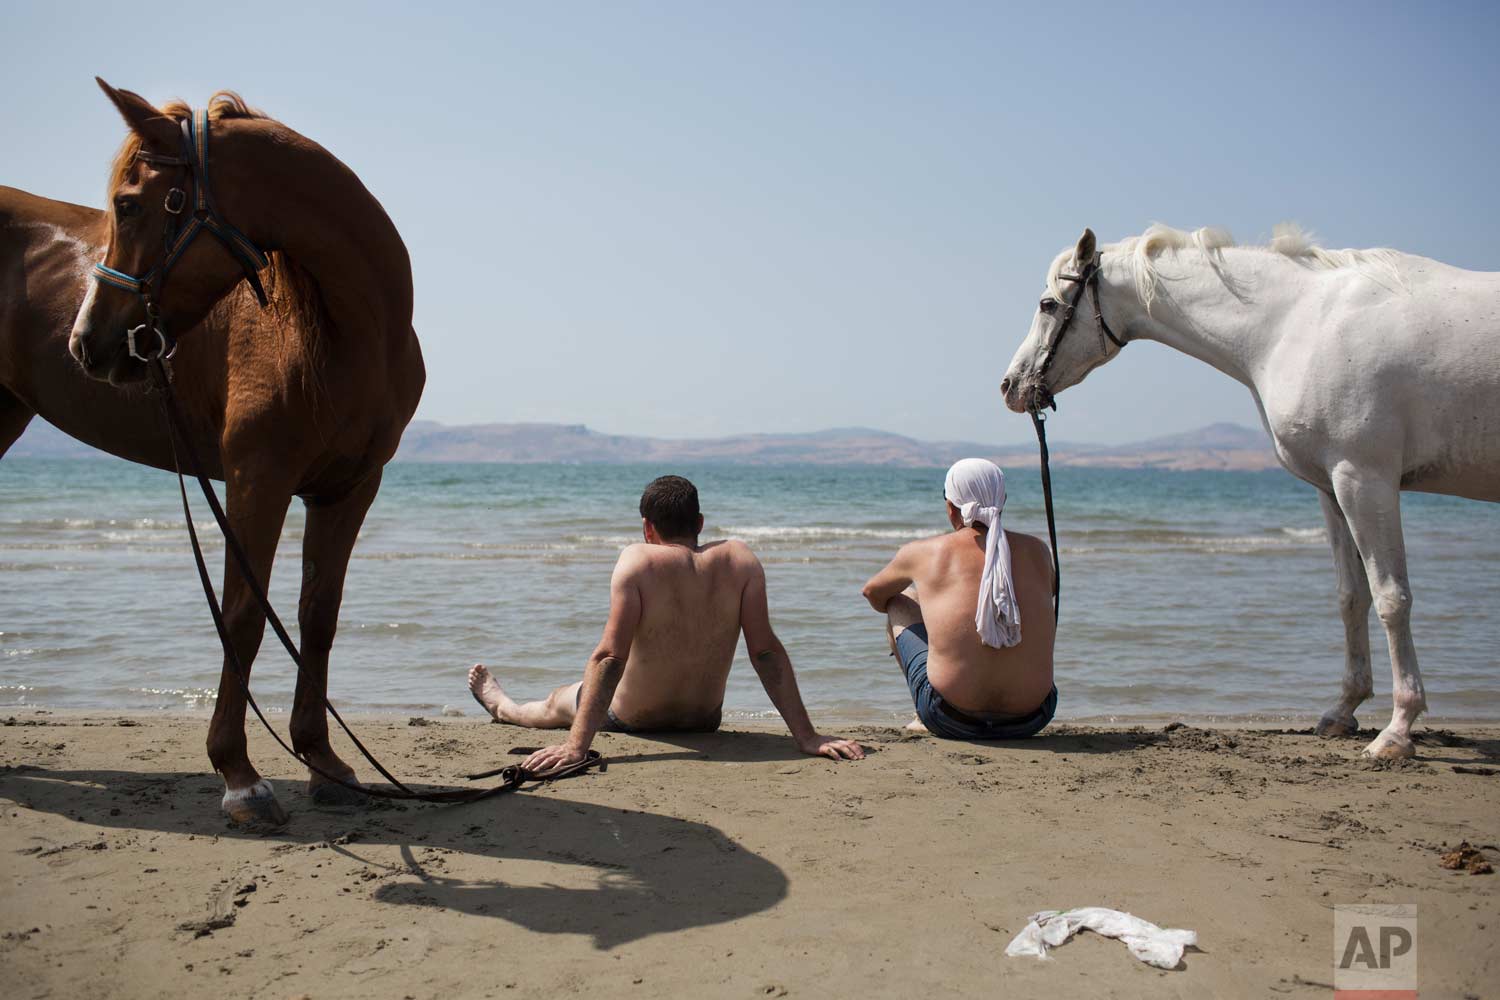  In this Saturday, Sept. 23, 2017 photo, Israeli Druse men sit with their horses on the shores of the Sea of Galilee near the northern Israeli Kibbutz of Ein Gev. (AP Photo/Oded Balilty) 